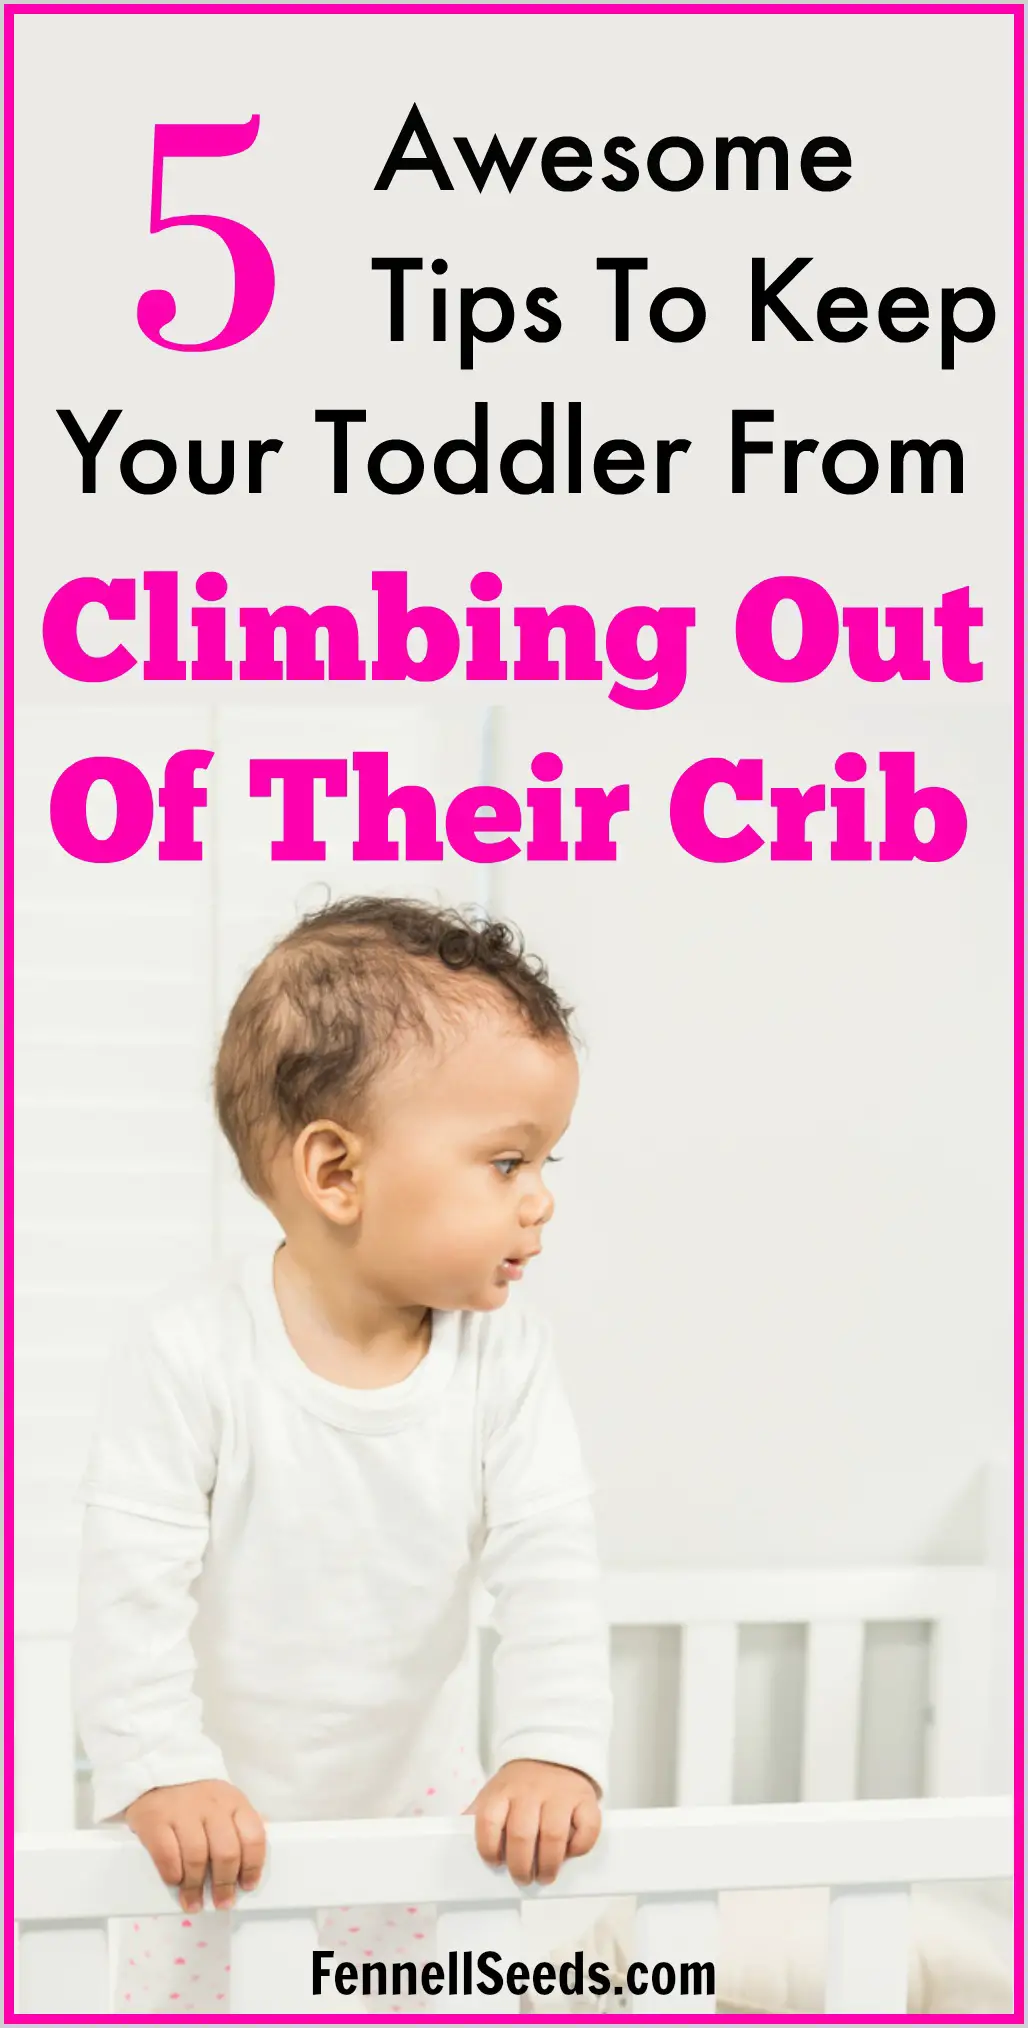 baby climbing out of crib | what to do when toddler climbs out of crib | how to keep baby from climbing out of crib | how to keep toddler from climbing out of crib | how to keep toddler in crib